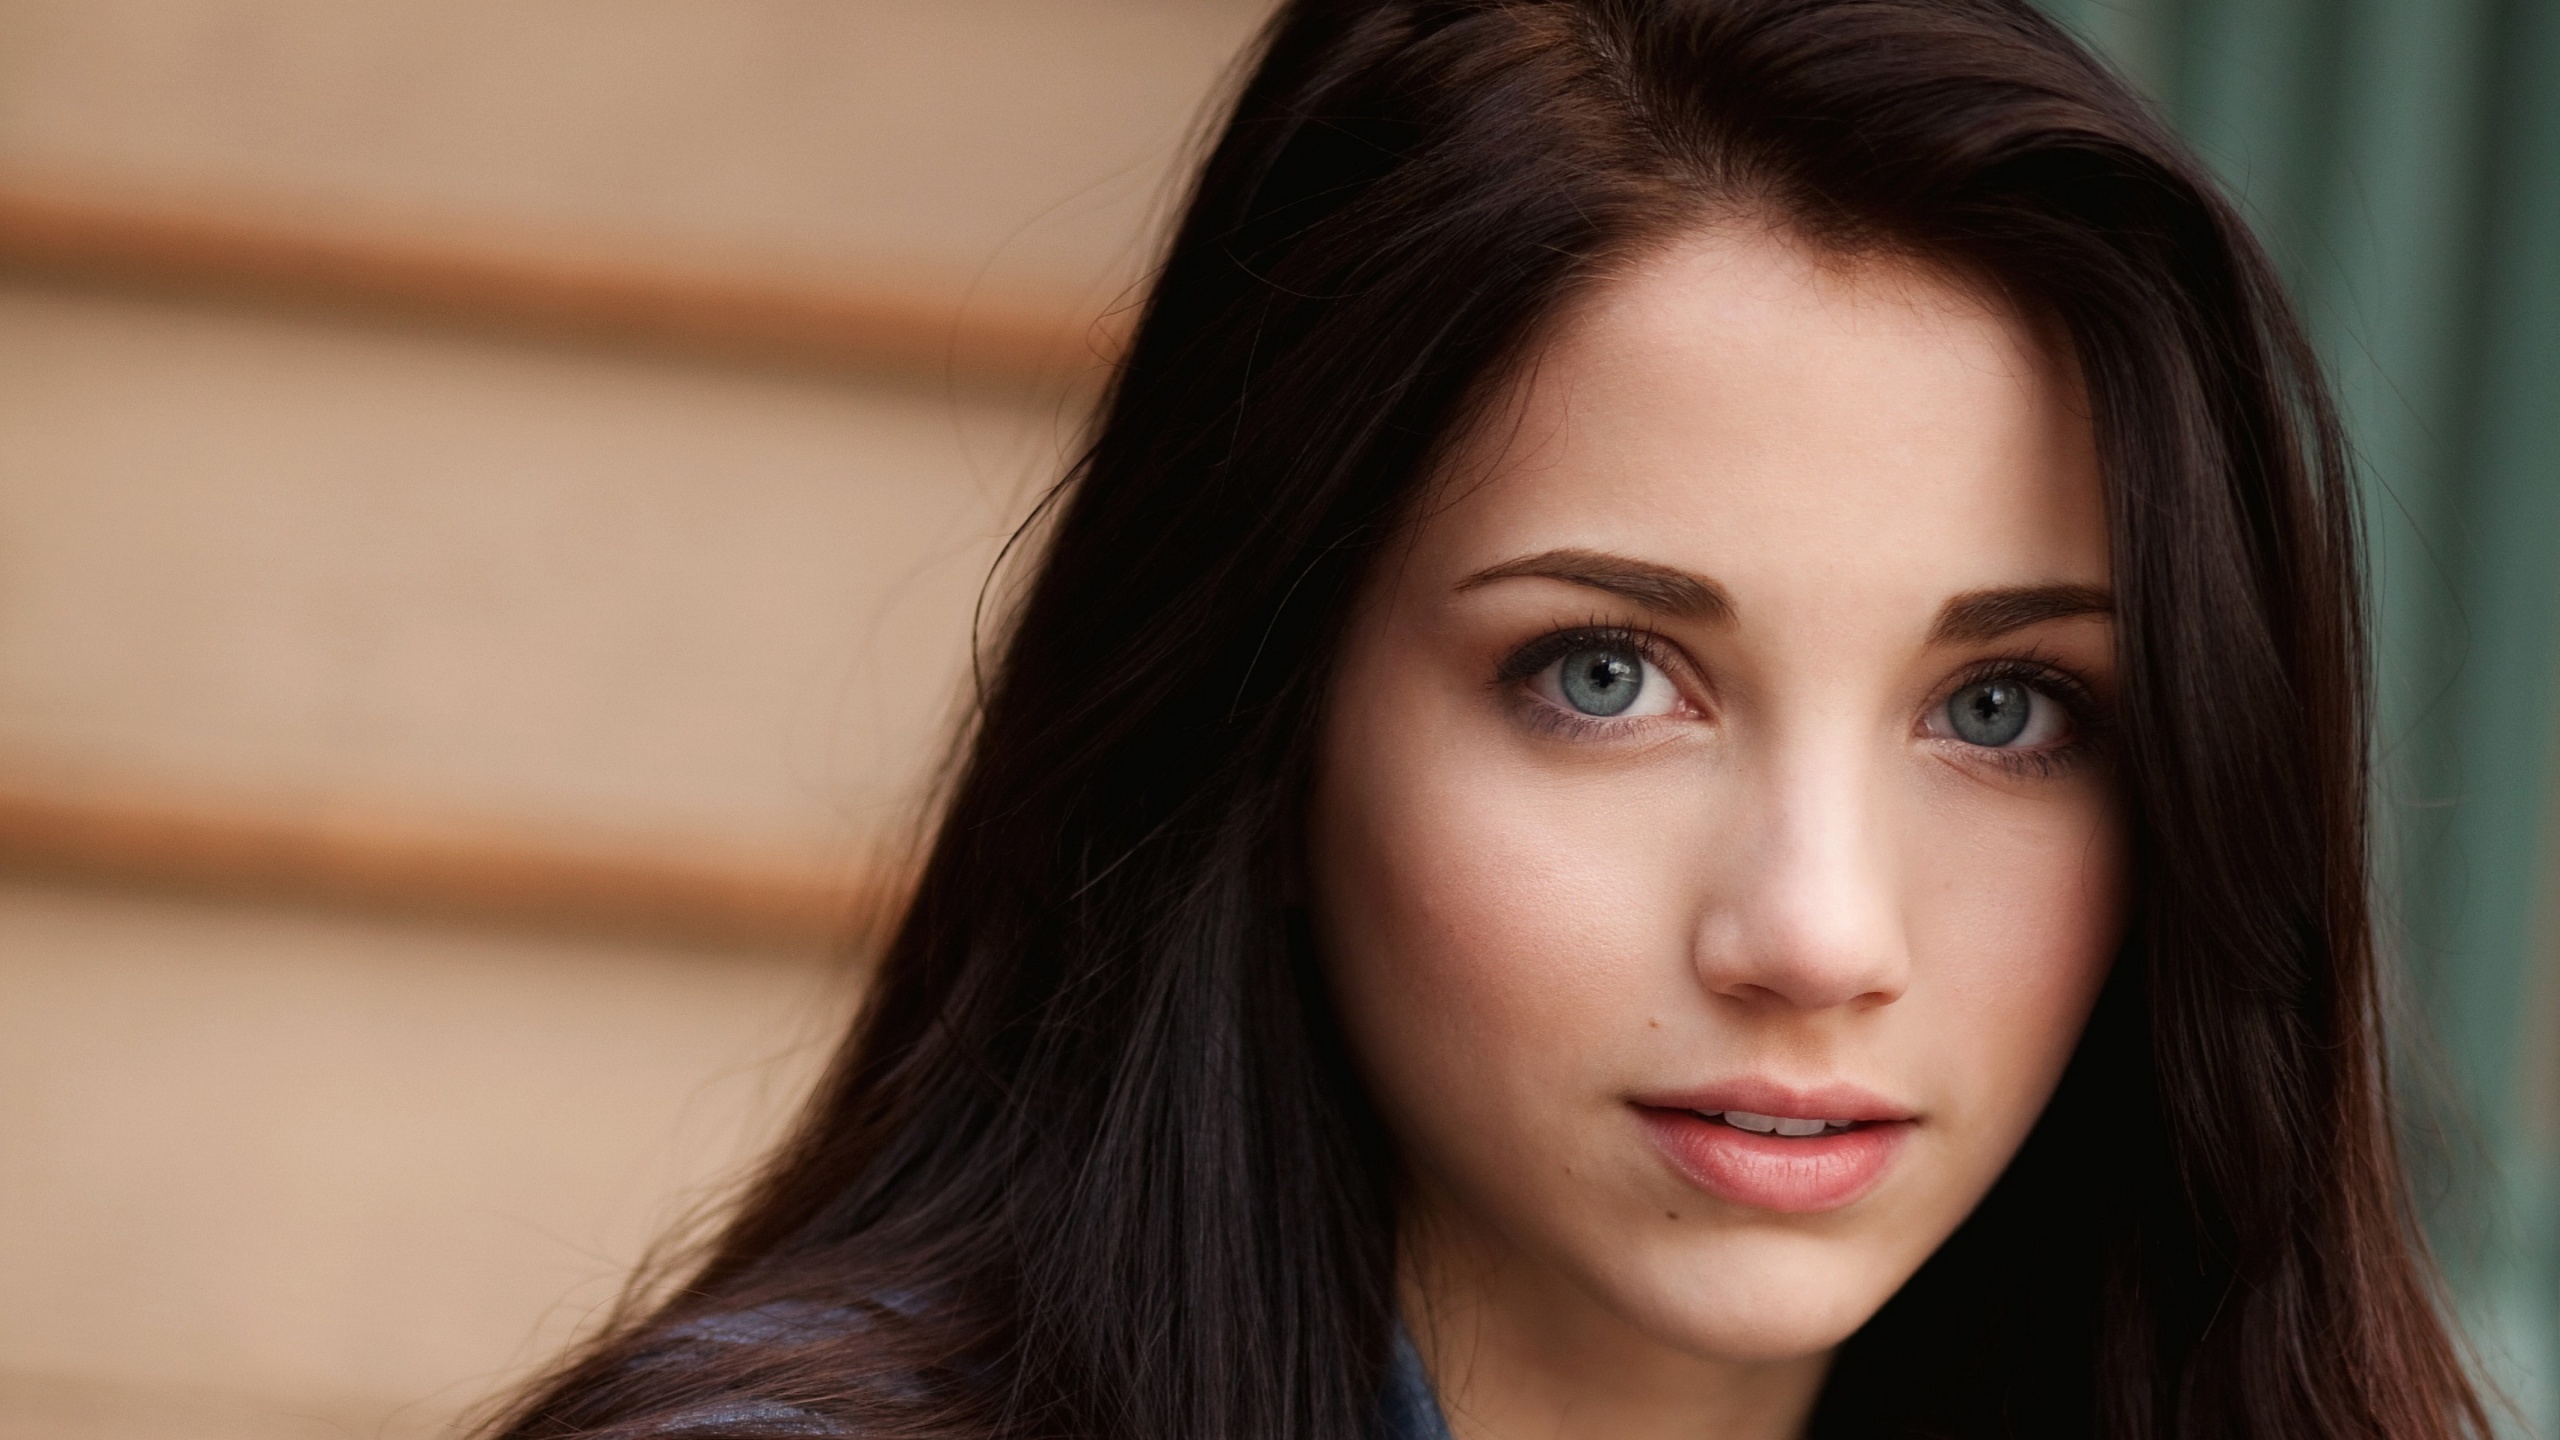 Description: The Wallpaper above is Emily rudd model Wallpaper in Resolution 2560x1440. Choose your Resolution and Download Emily rudd model Wallpaper